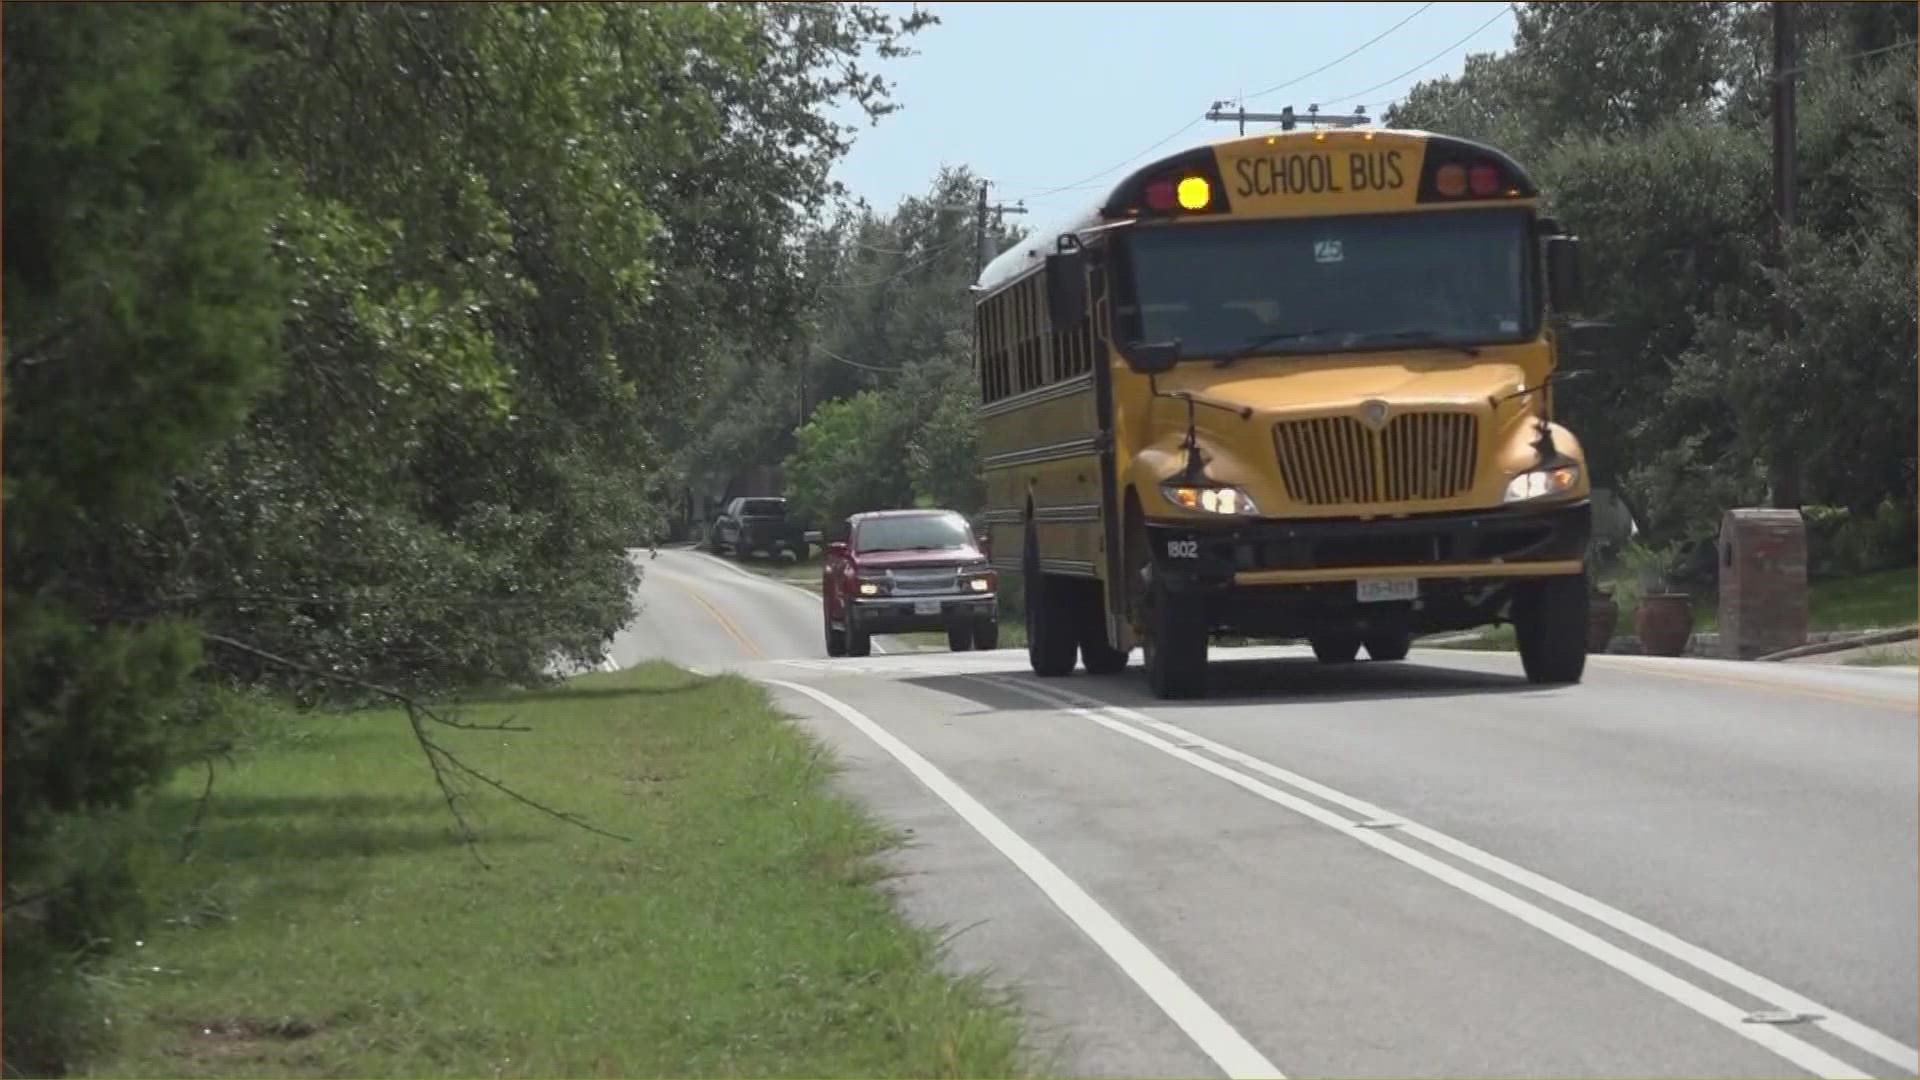 With an increased cost of living, school districts are seeing a shortage of bus drivers to drive the bus routes every day. KVUE's Dominique Newland has more.